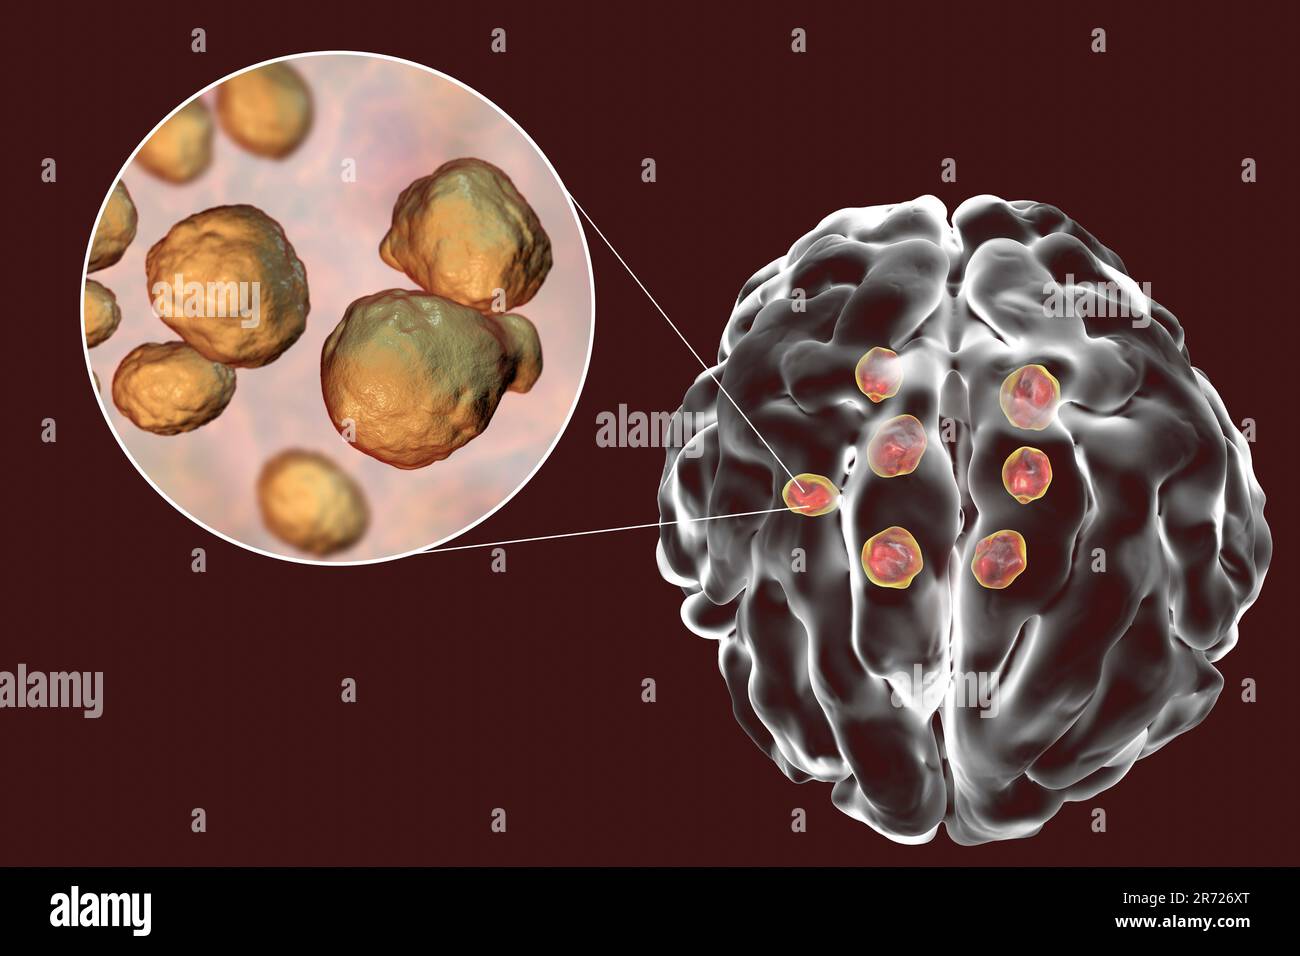 Multiple brain parenchyma lesions caused by fungus Cryptococcus neoformans, illustration. C. neoformans is a yeast- like organism. Cryptococcosis is a Stock Photo